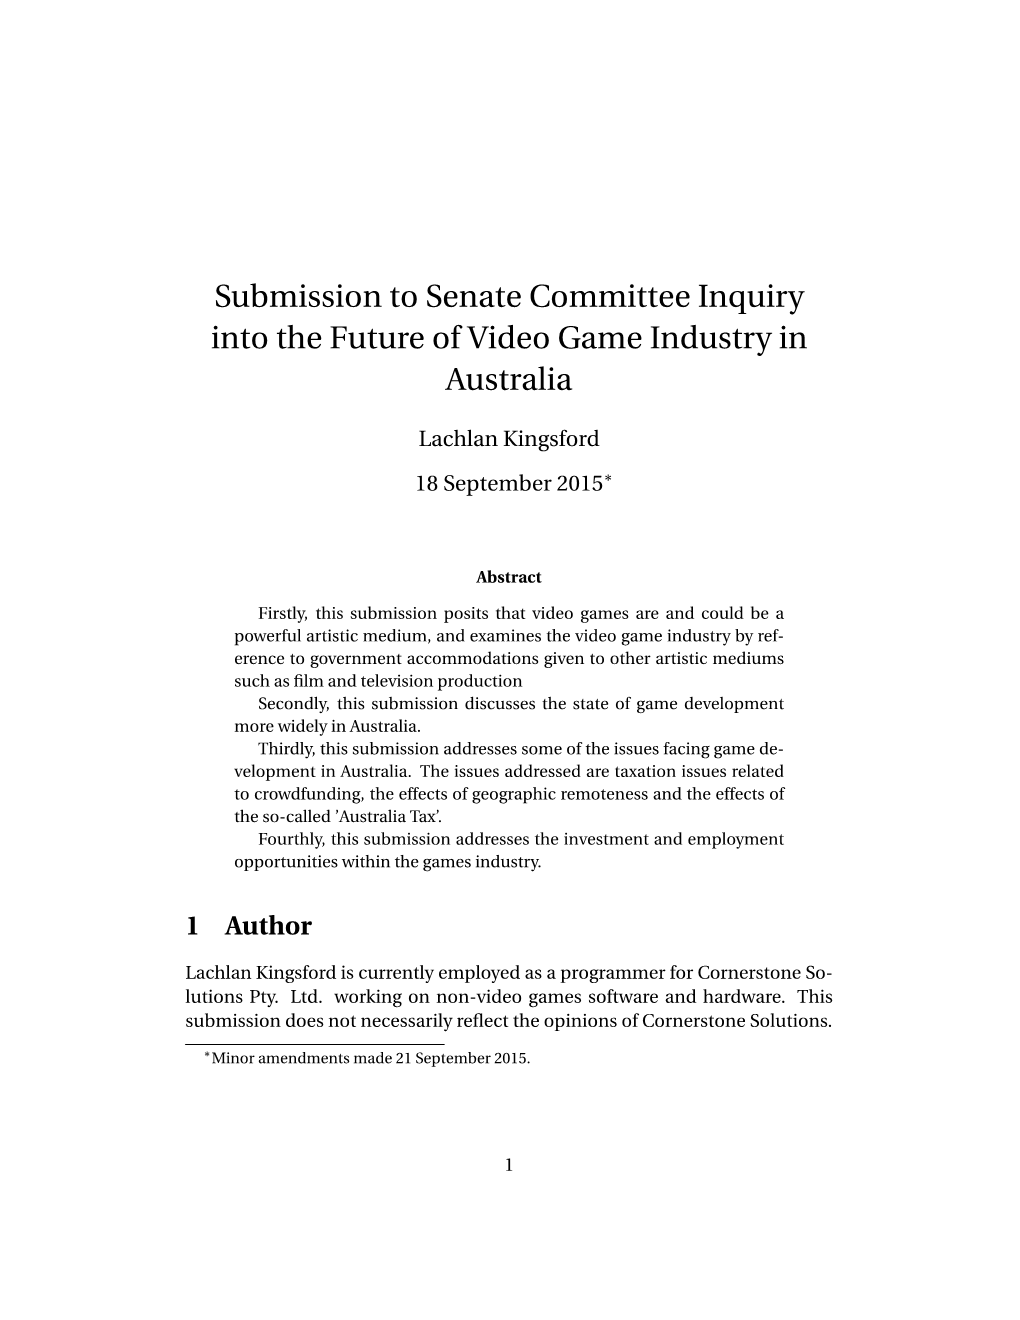 Submission to Senate Committee Inquiry Into the Future of Video Game Industry in Australia